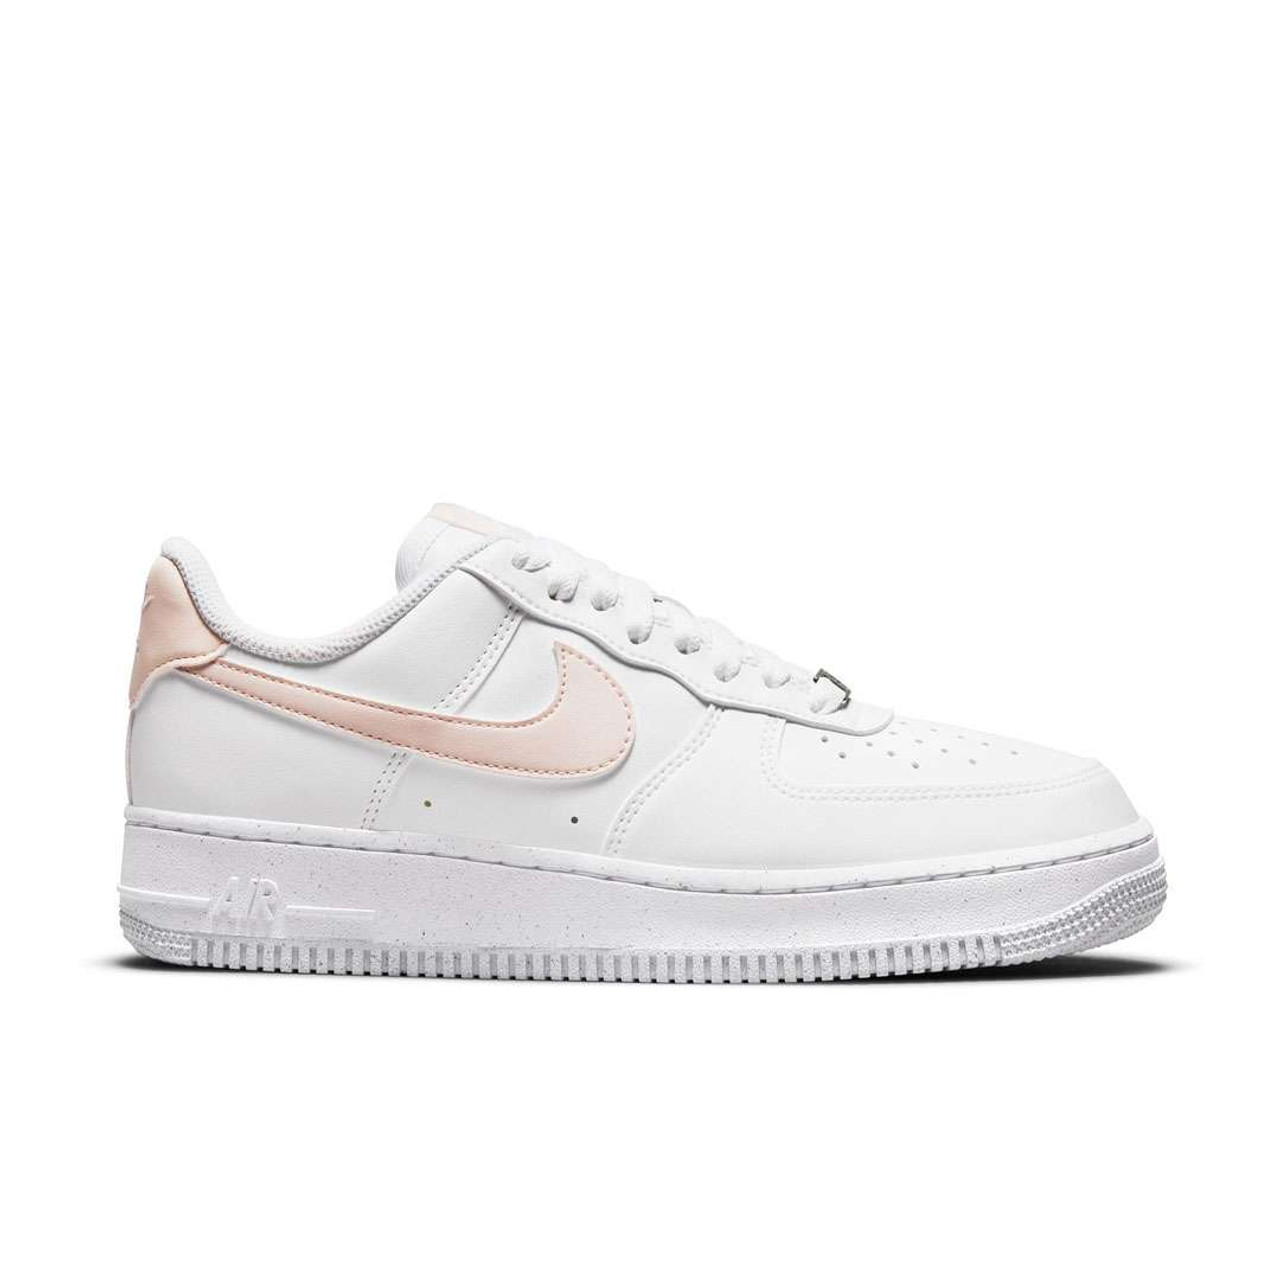 Nike Women's Air Force 1 '07 Nature Sneakers - White/ Pale Coral